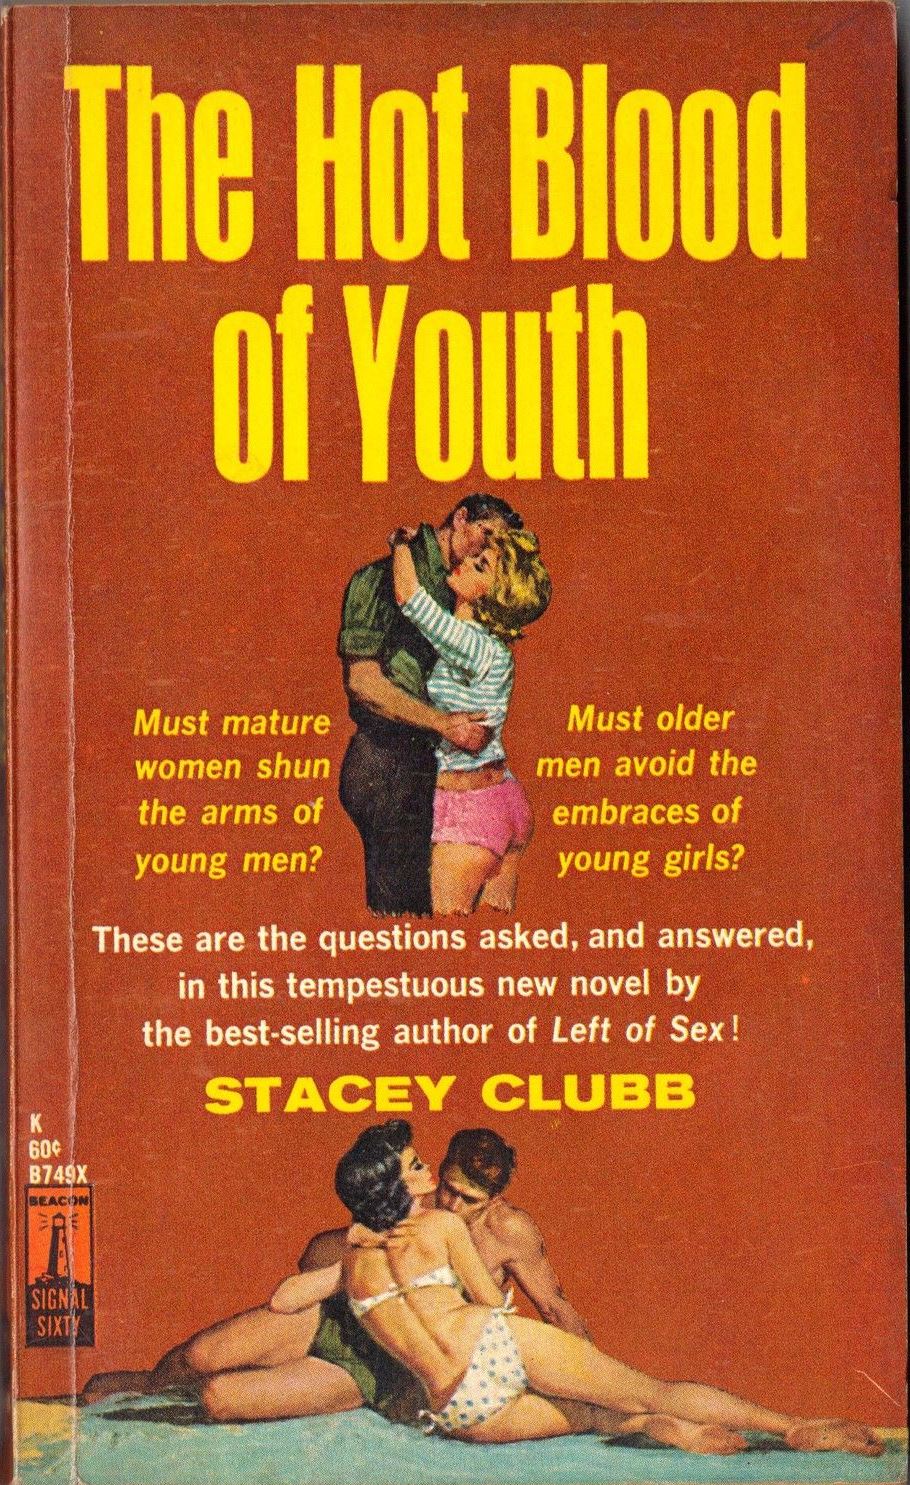 The Hot Blood Of Youth -- Pulp Covers image image